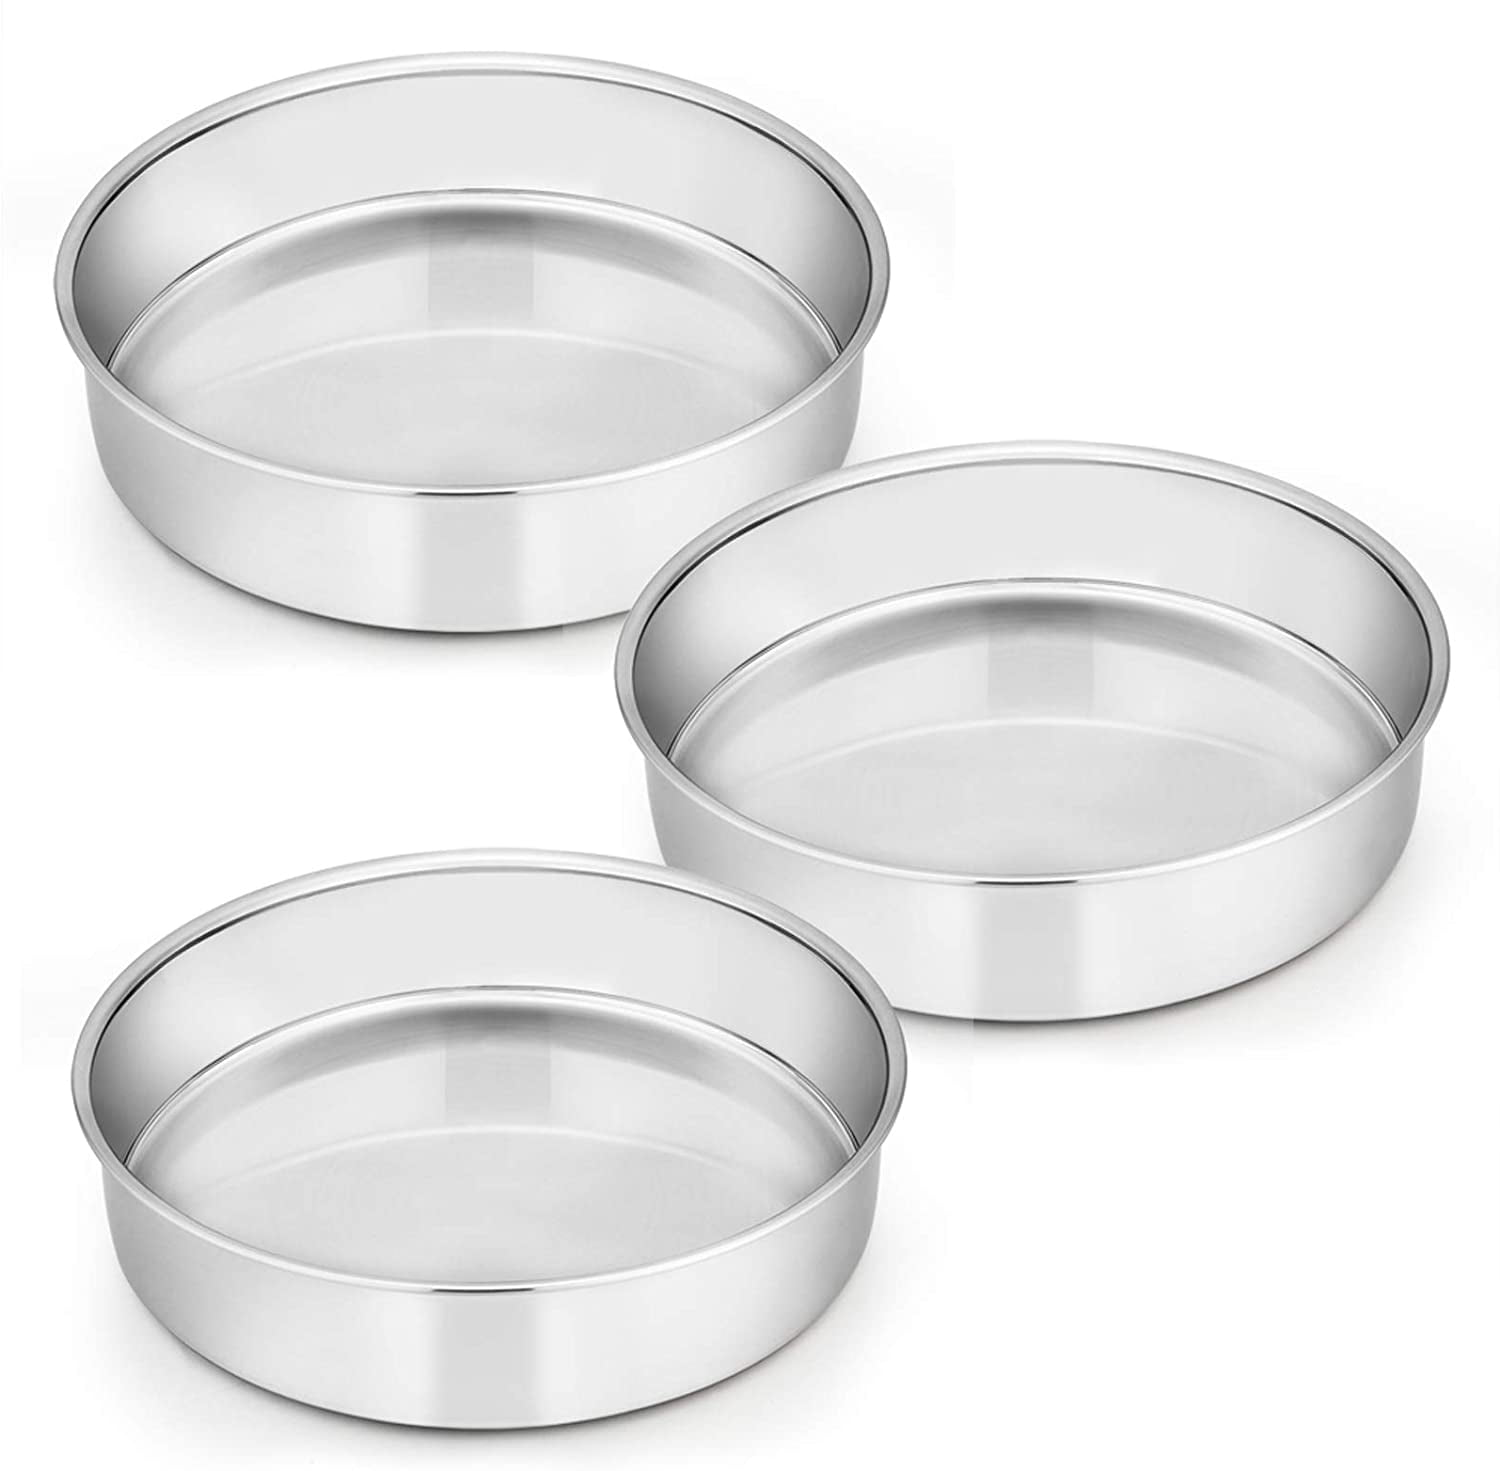 Round Oven Tray Stainless-Steel Non-Toxic & Healthy Heavy Duty & Dishwasher Safe 